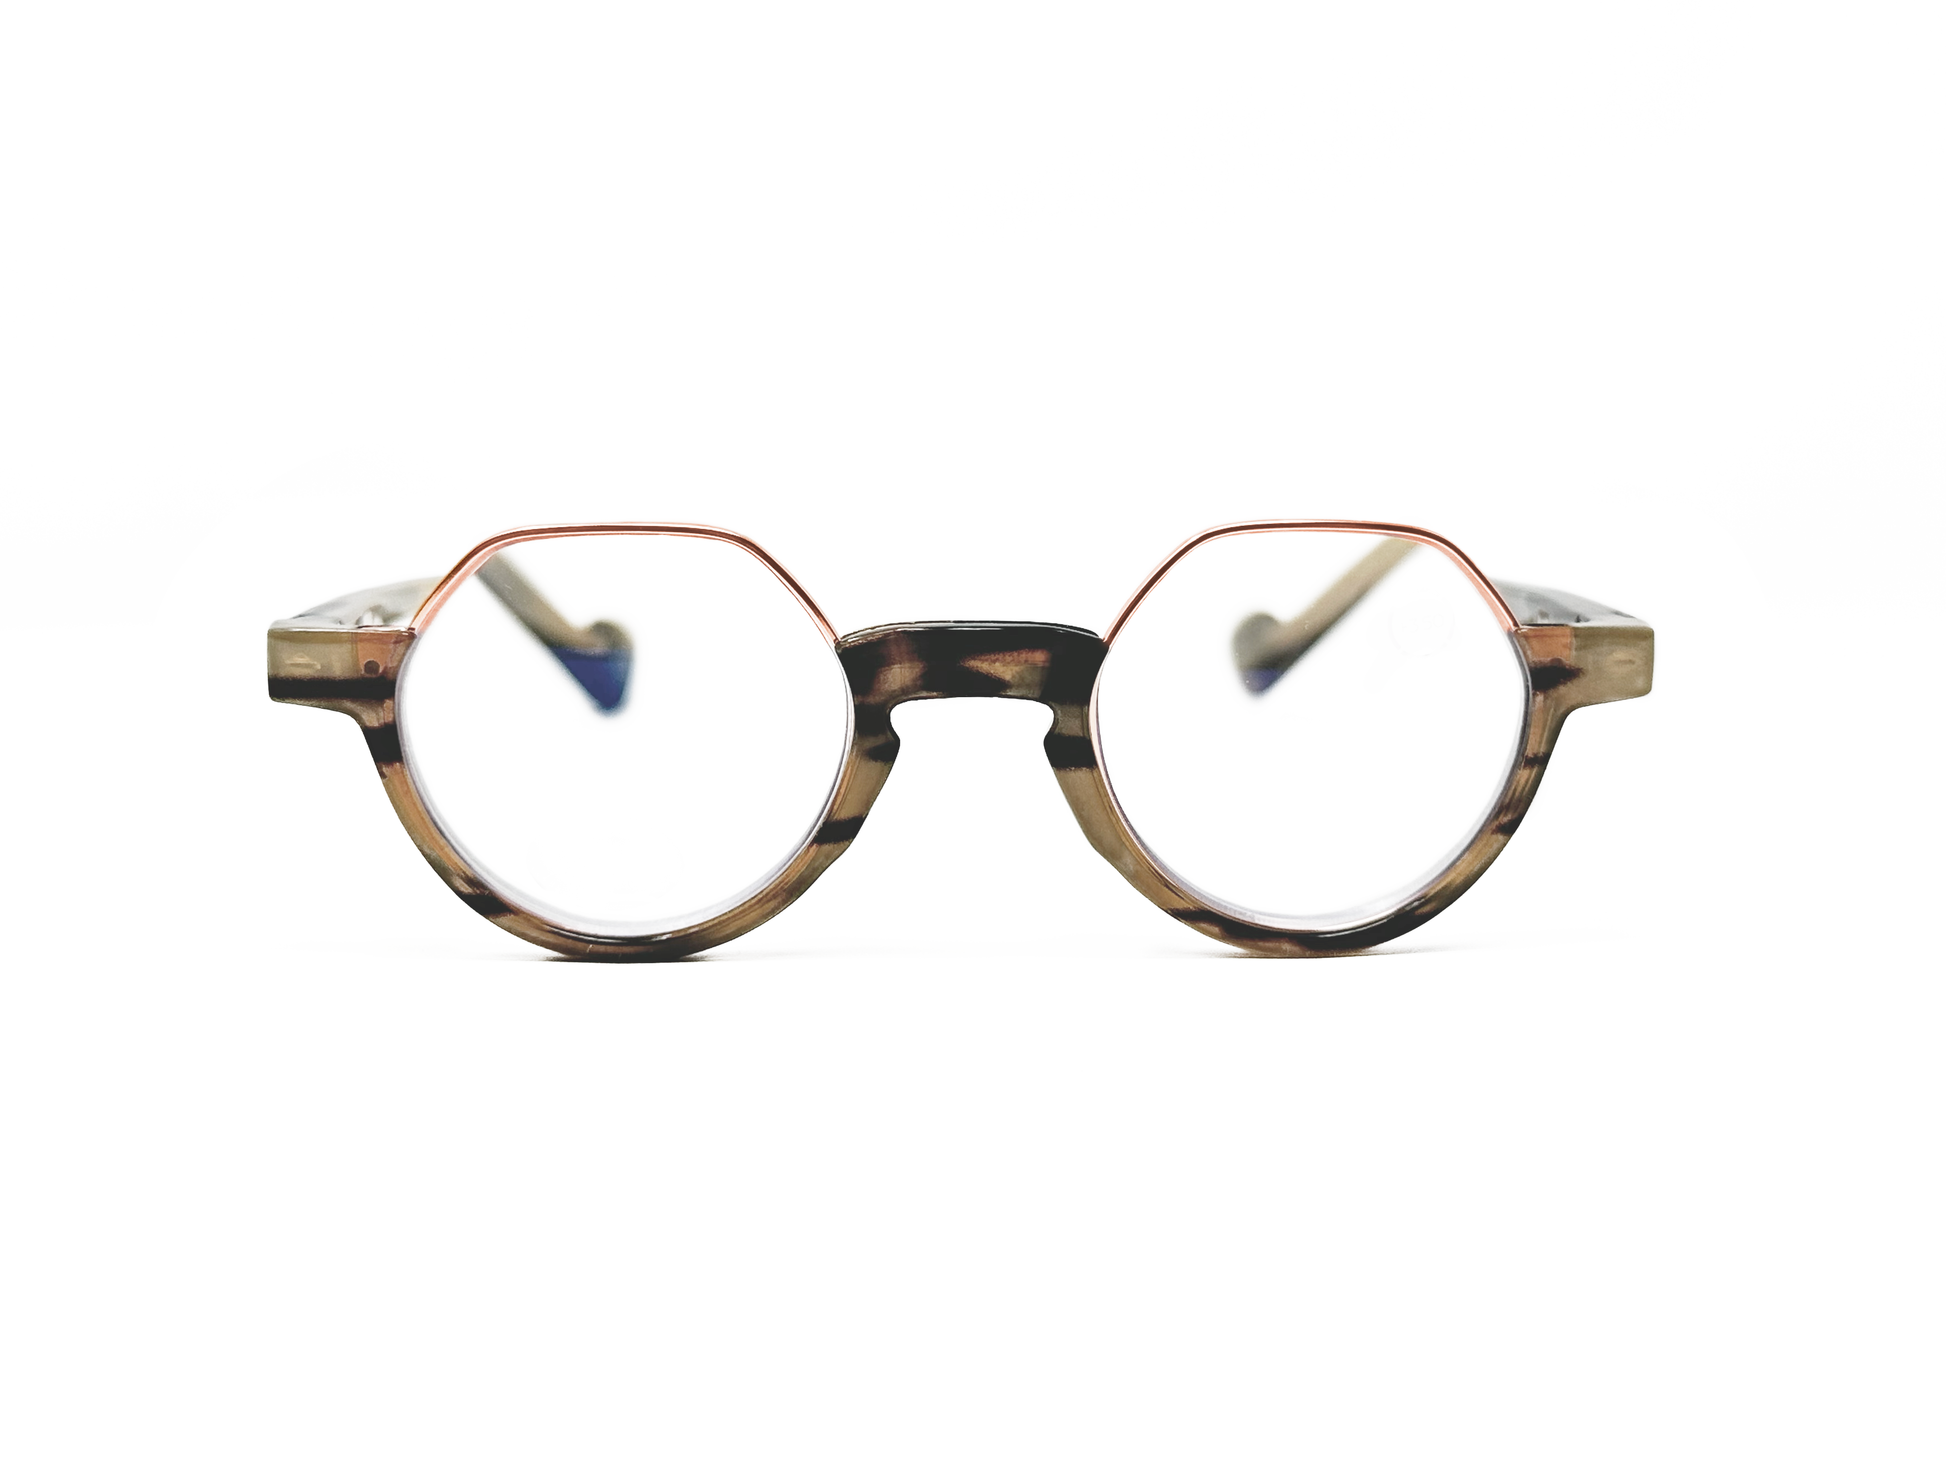 Aptica round acetate reader with flattop. Model: Rituals. Color: Natural Buffalo Horn - Beige buffalo horn with rose gold trim on top. Front view.